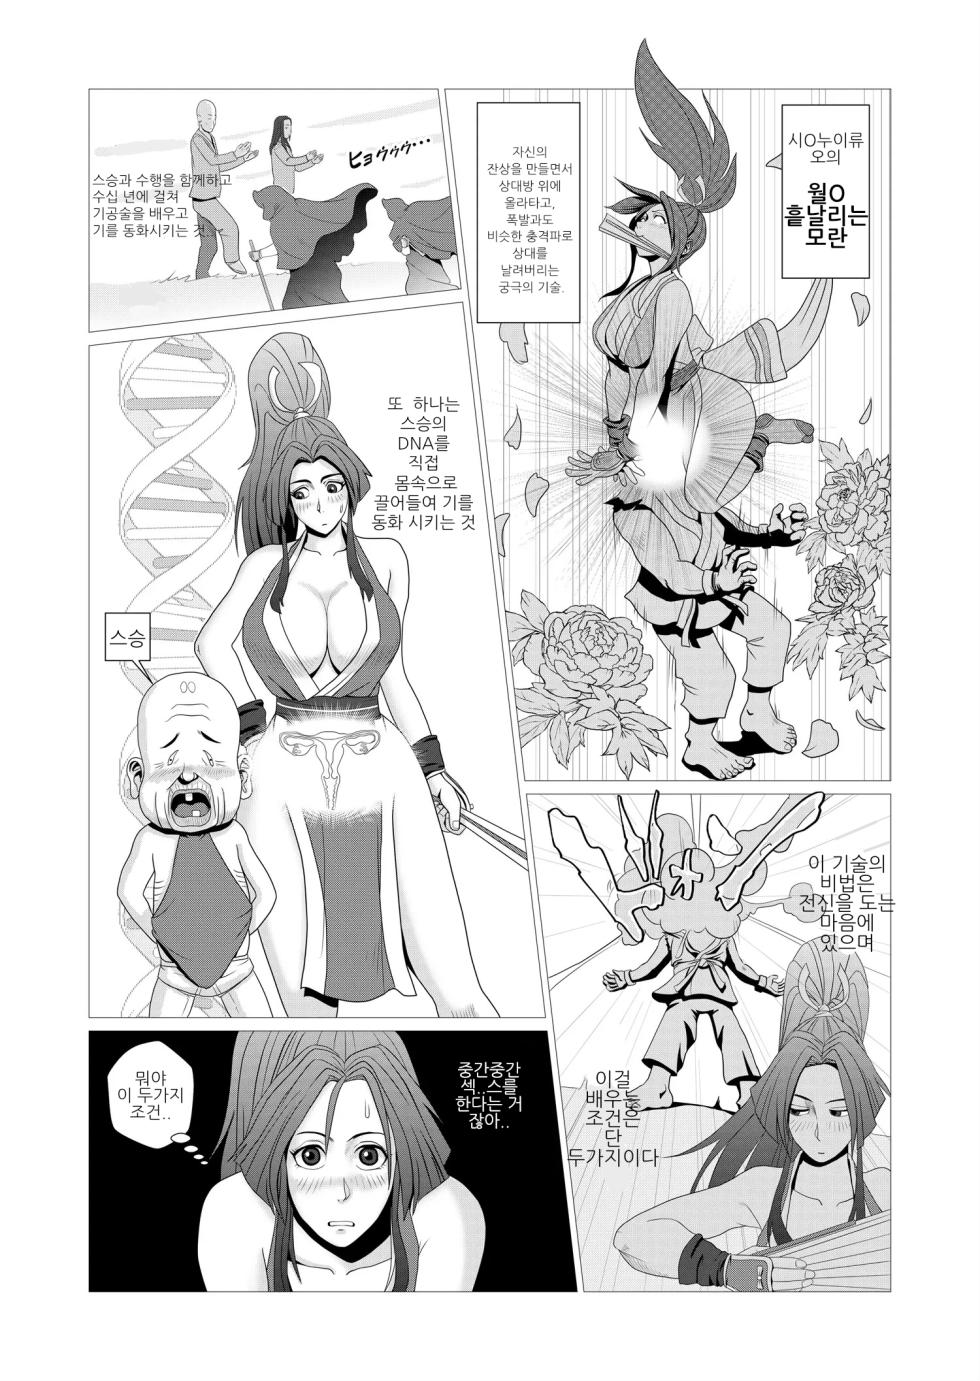 [Falcon115 (Forester)] Maidono (The King of Fighters) [Korean] [Digital] - Page 2